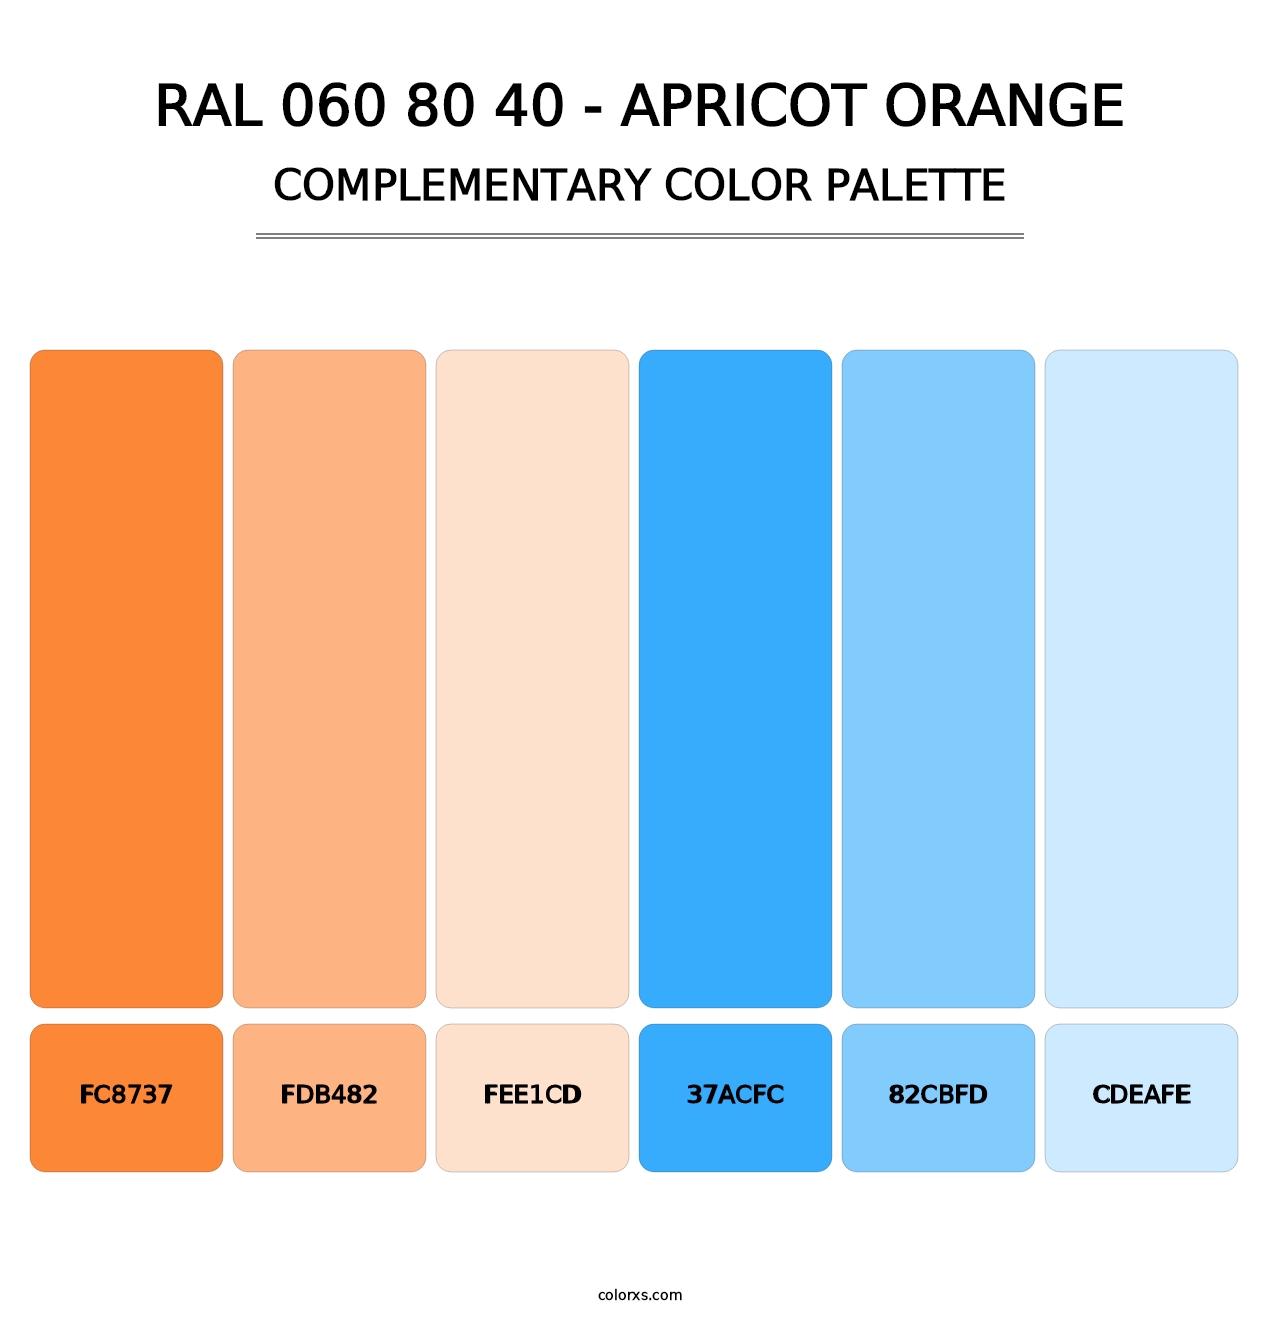 RAL 060 80 40 - Apricot Orange - Complementary Color Palette